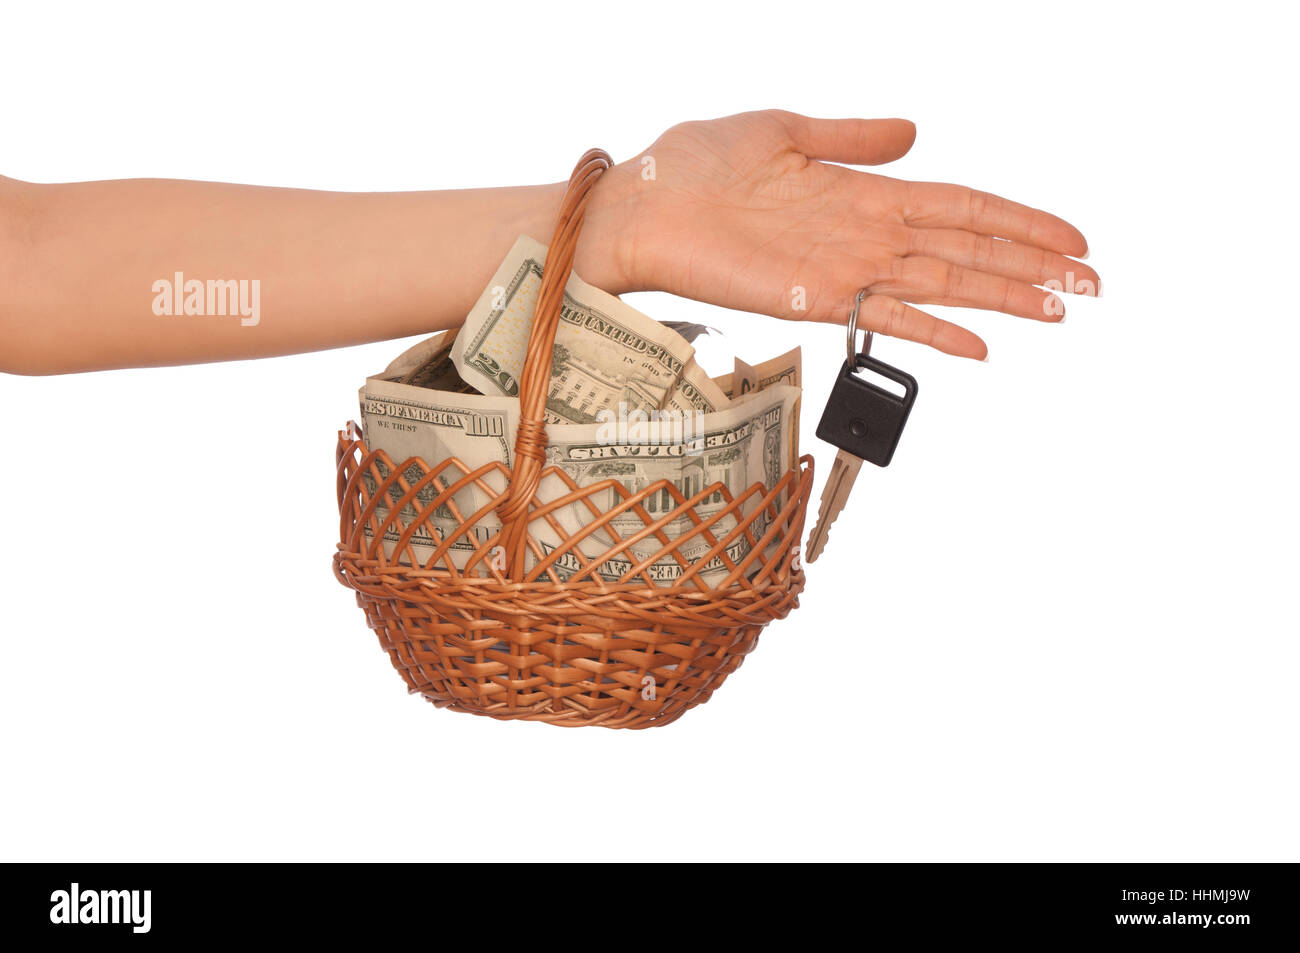 dollar, dollars, currency, brown, brownish, brunette, coin, basket, wealth, Stock Photo